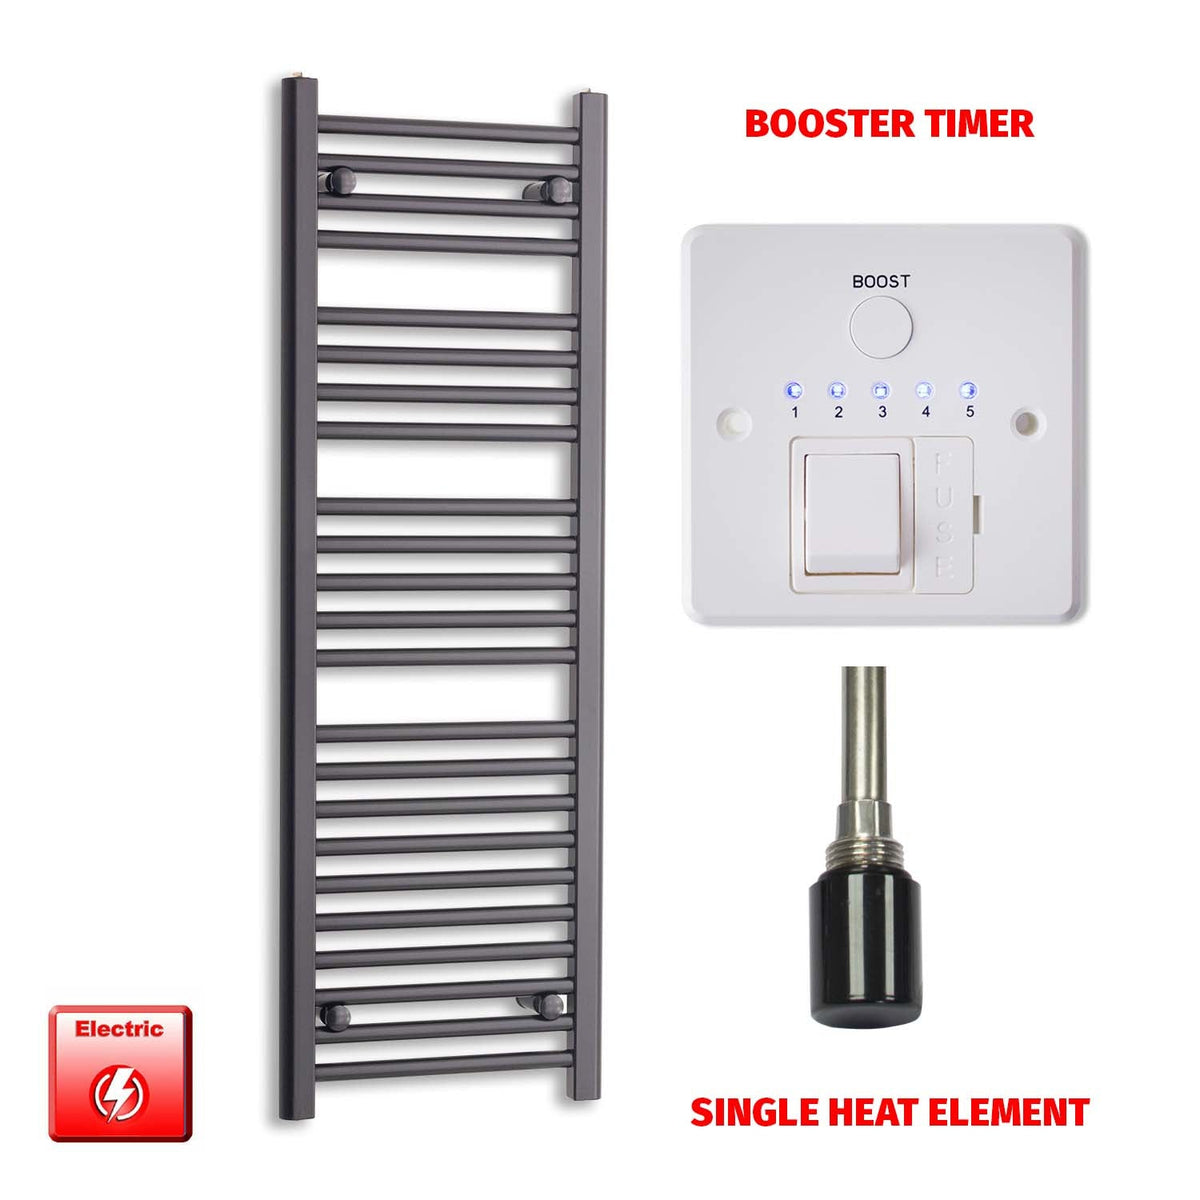 1200mm High 450mm Wide Flat Black Pre-Filled Electric Heated Towel Rail Radiator HTR Single Booster Timer